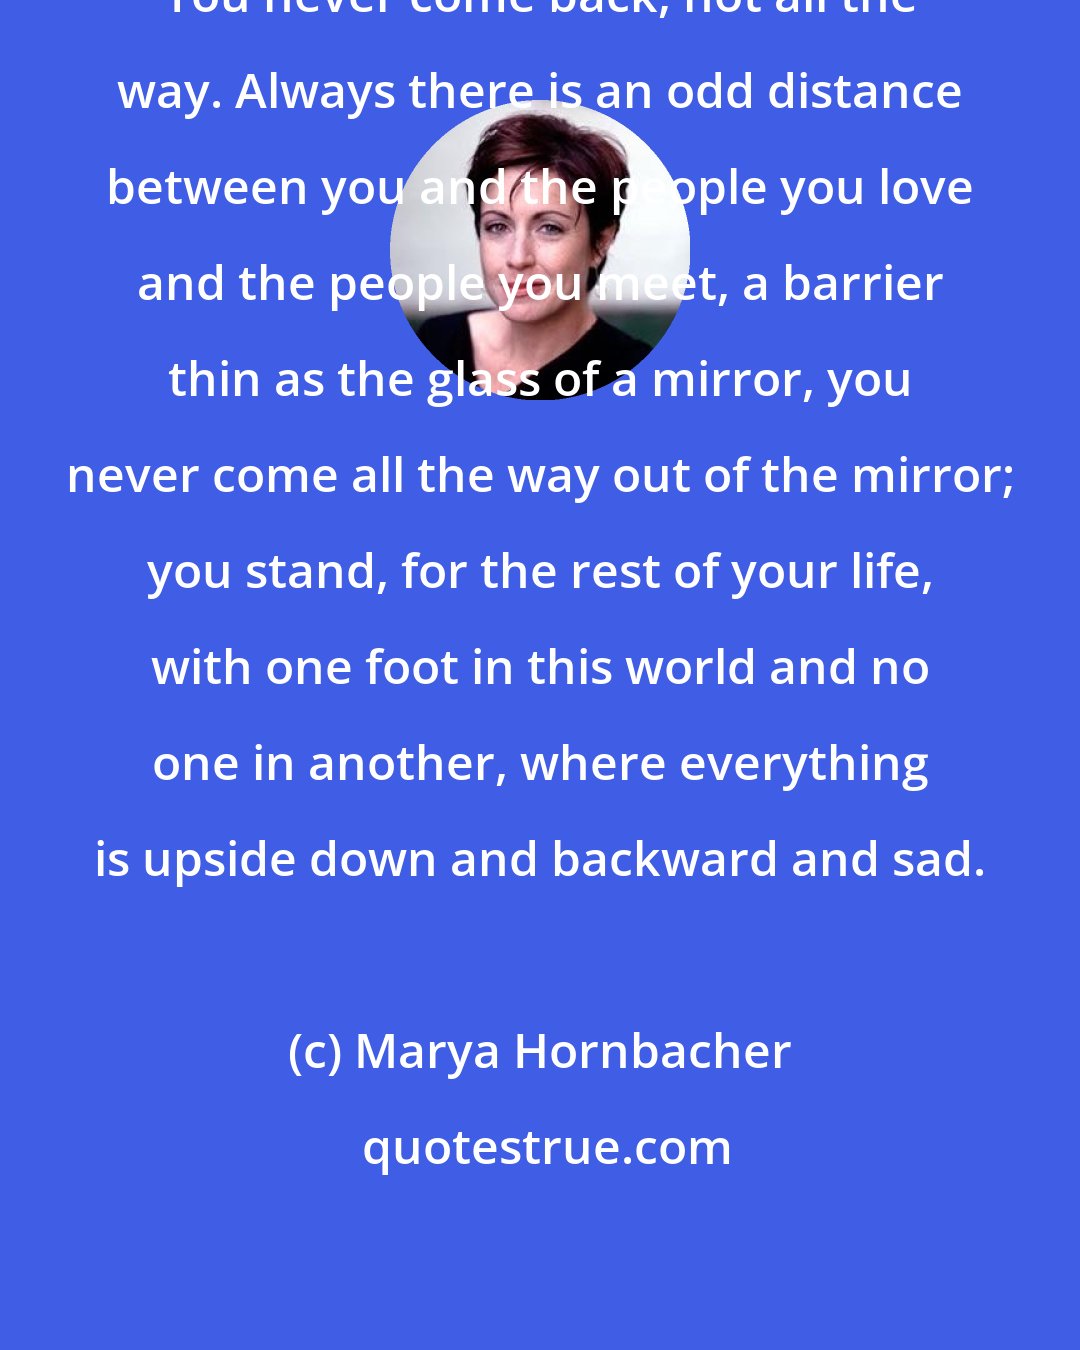 Marya Hornbacher: You never come back, not all the way. Always there is an odd distance between you and the people you love and the people you meet, a barrier thin as the glass of a mirror, you never come all the way out of the mirror; you stand, for the rest of your life, with one foot in this world and no one in another, where everything is upside down and backward and sad.